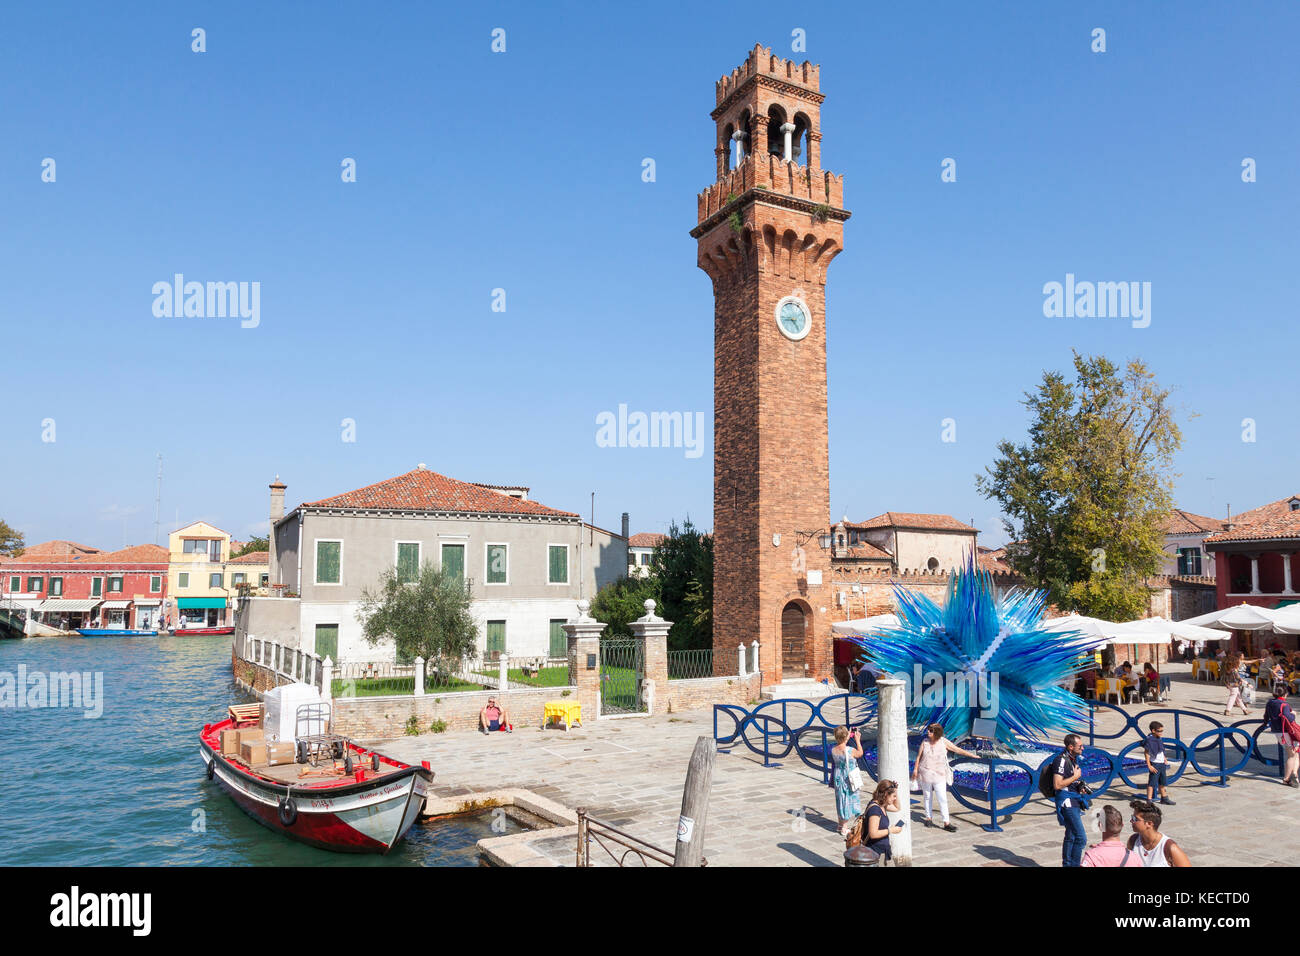 Elevated view of Campo Santo  Stefano and the Comet Glass Star, Murano, Venice, Italy with tourists and a colorful red boat in the canal Stock Photo